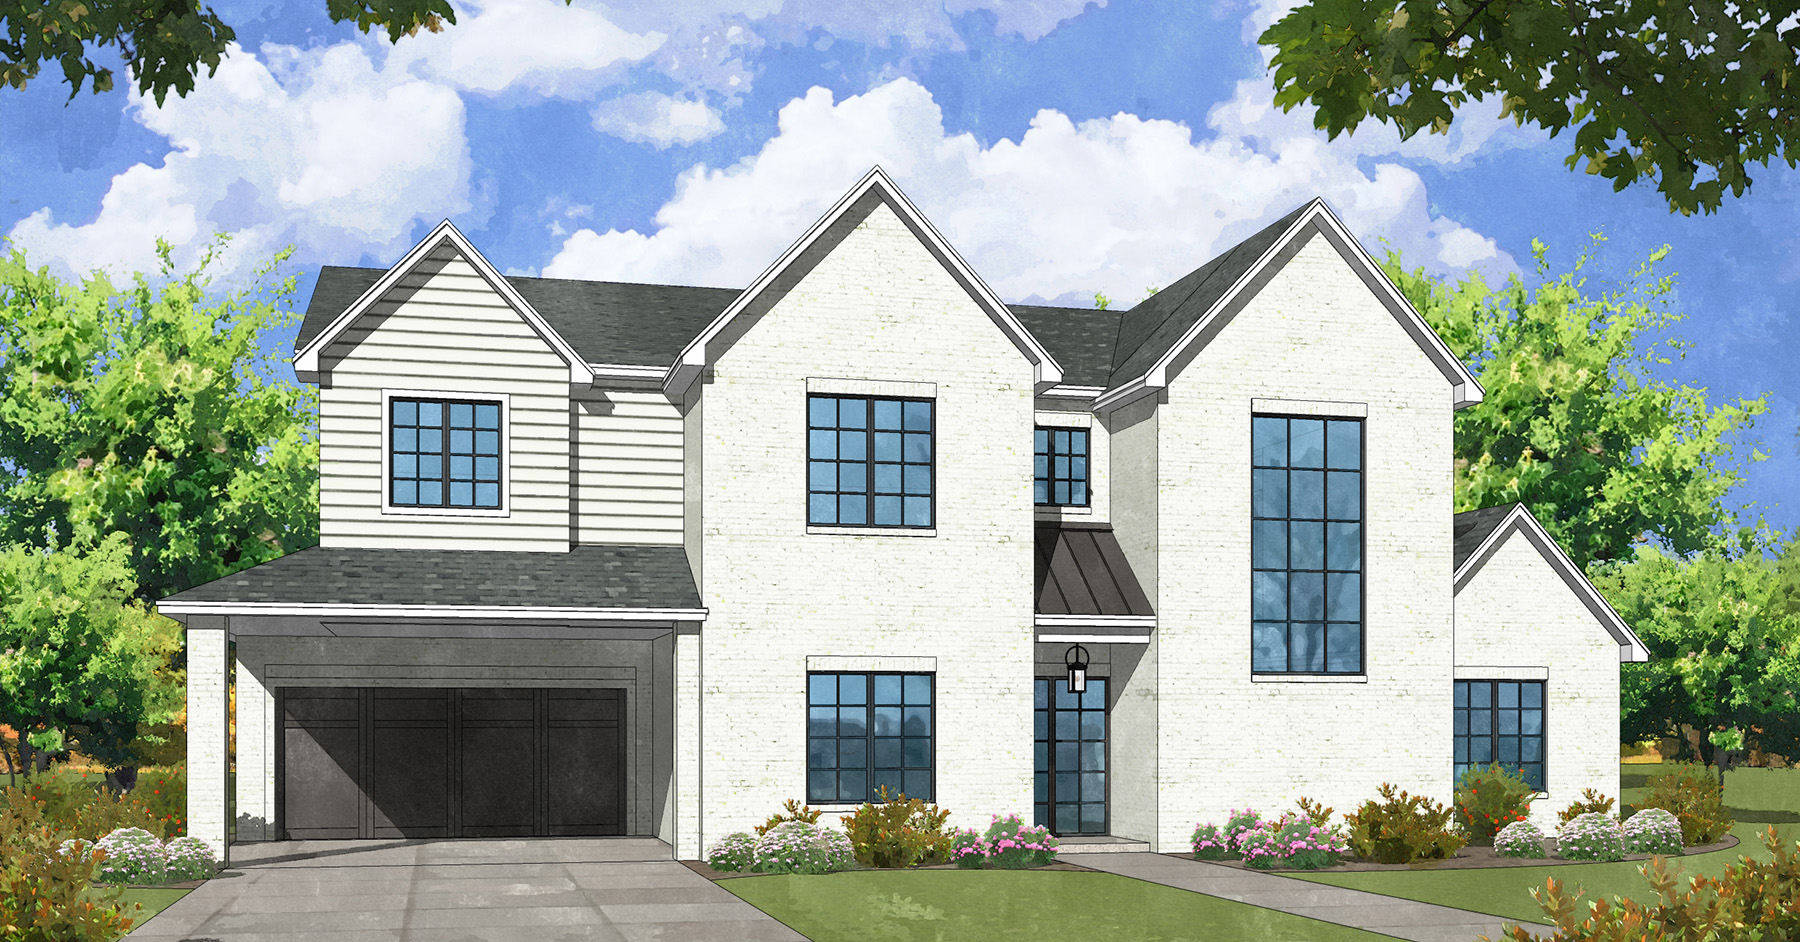 Briargrove<br/>Custom Home, Completion Summer/Fall 2023<br/>6248 Willers Way, Houston, TX 77057